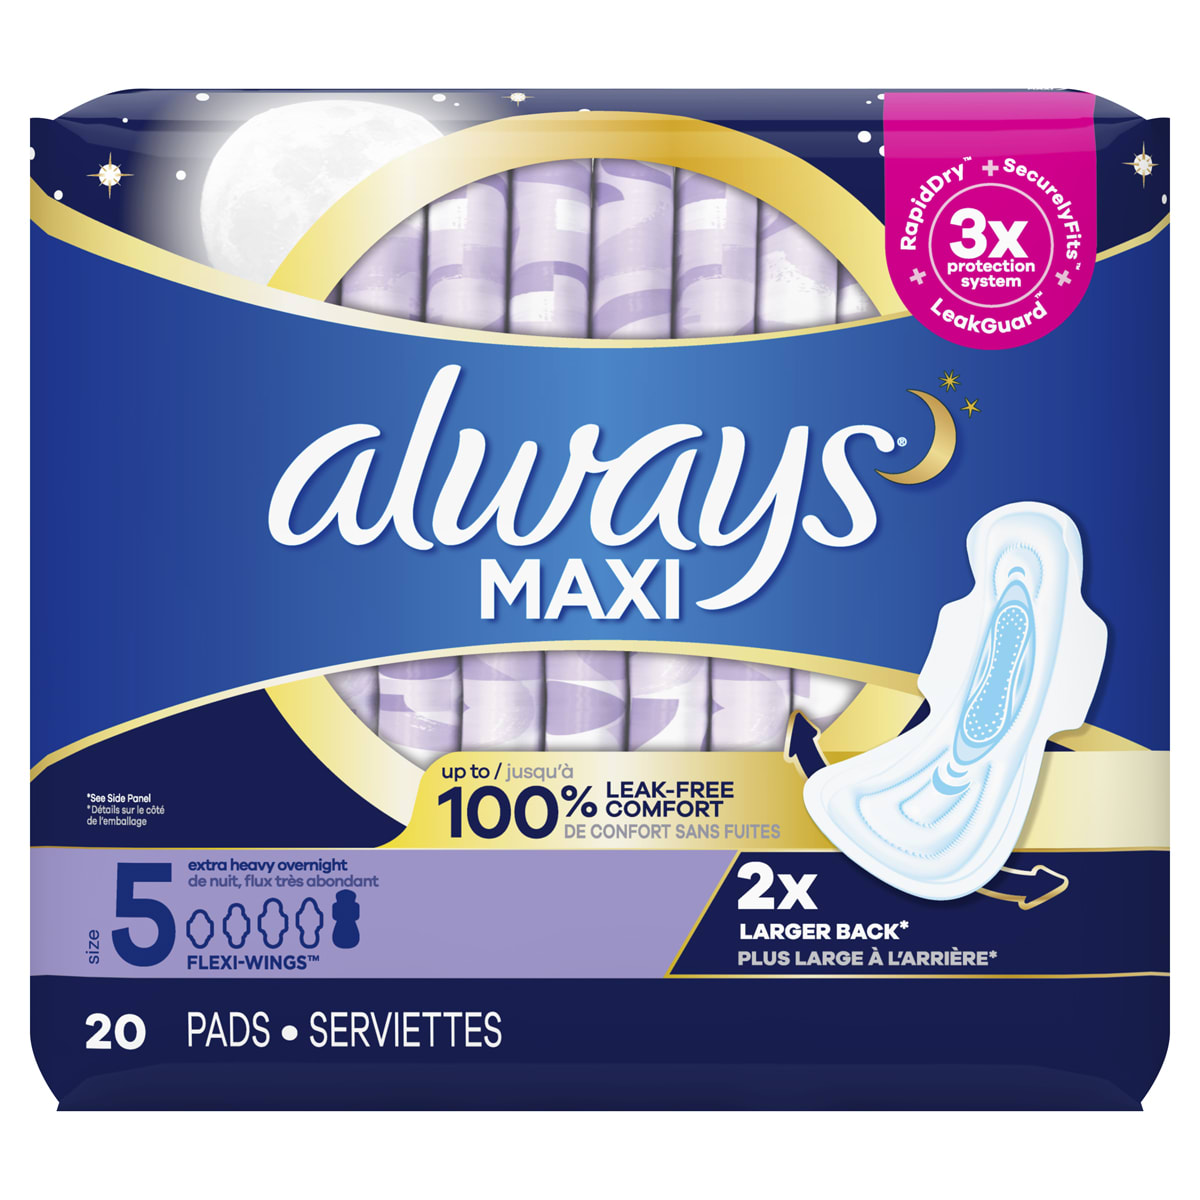 https://images.ctfassets.net/o5hnyn1x0ewo/51LU8PWB4M7k38Fn6PuTm0/f69aeafcd15de4f7075bfa9a2edc12e5/Maxi-Pads-Size-5-Extra-Heavy-Overnight-with-Wings-20-Count.jpg